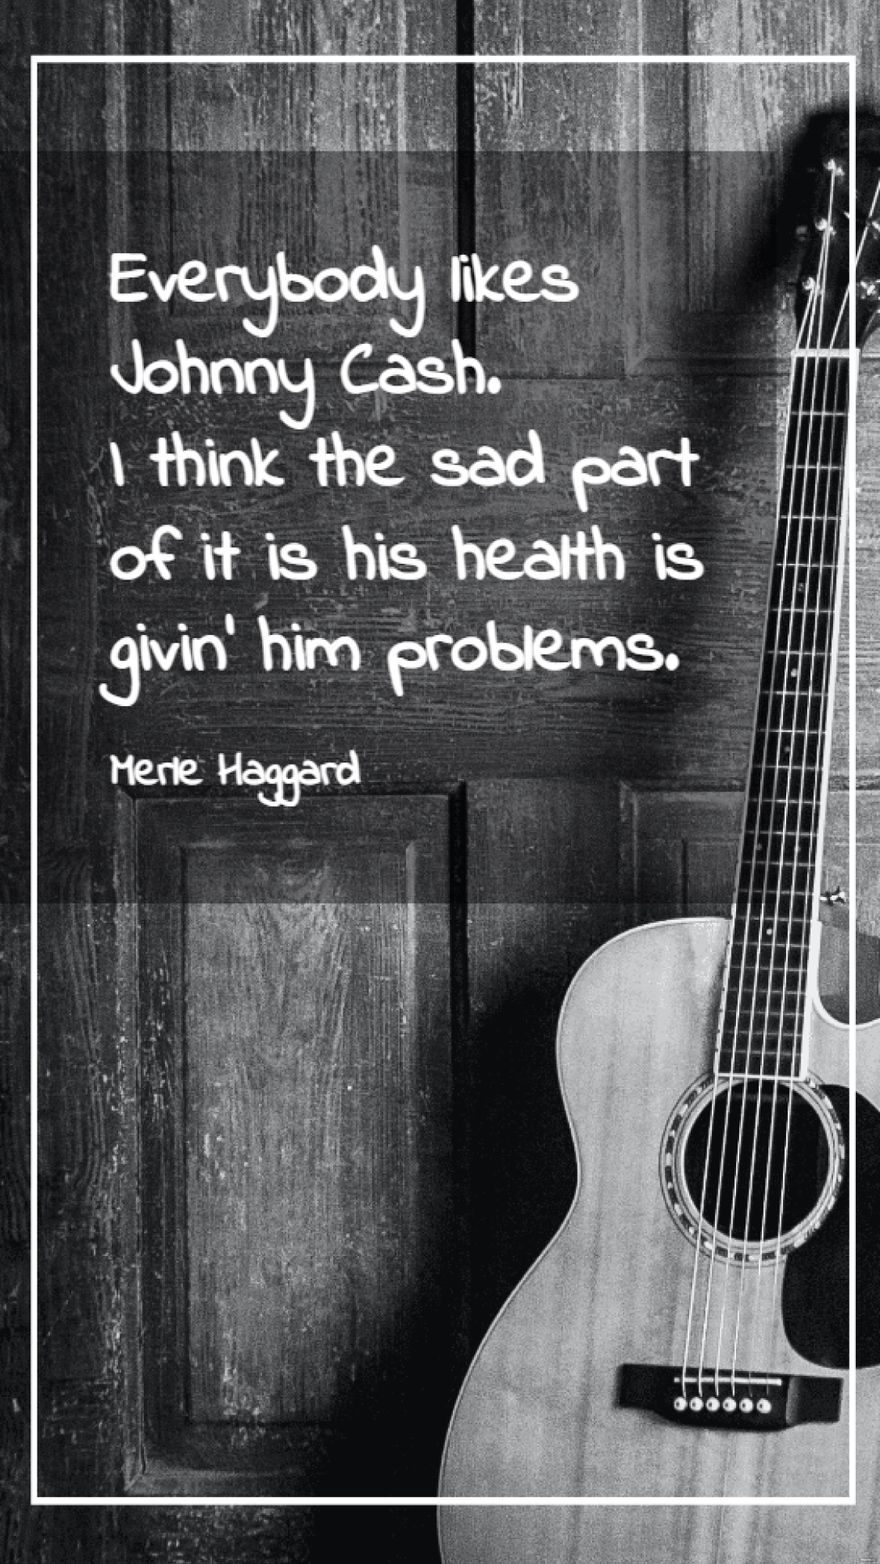 Merle Haggard - Everybody likes Johnny Cash. I think the sad part of it is his health is givin' him problems.